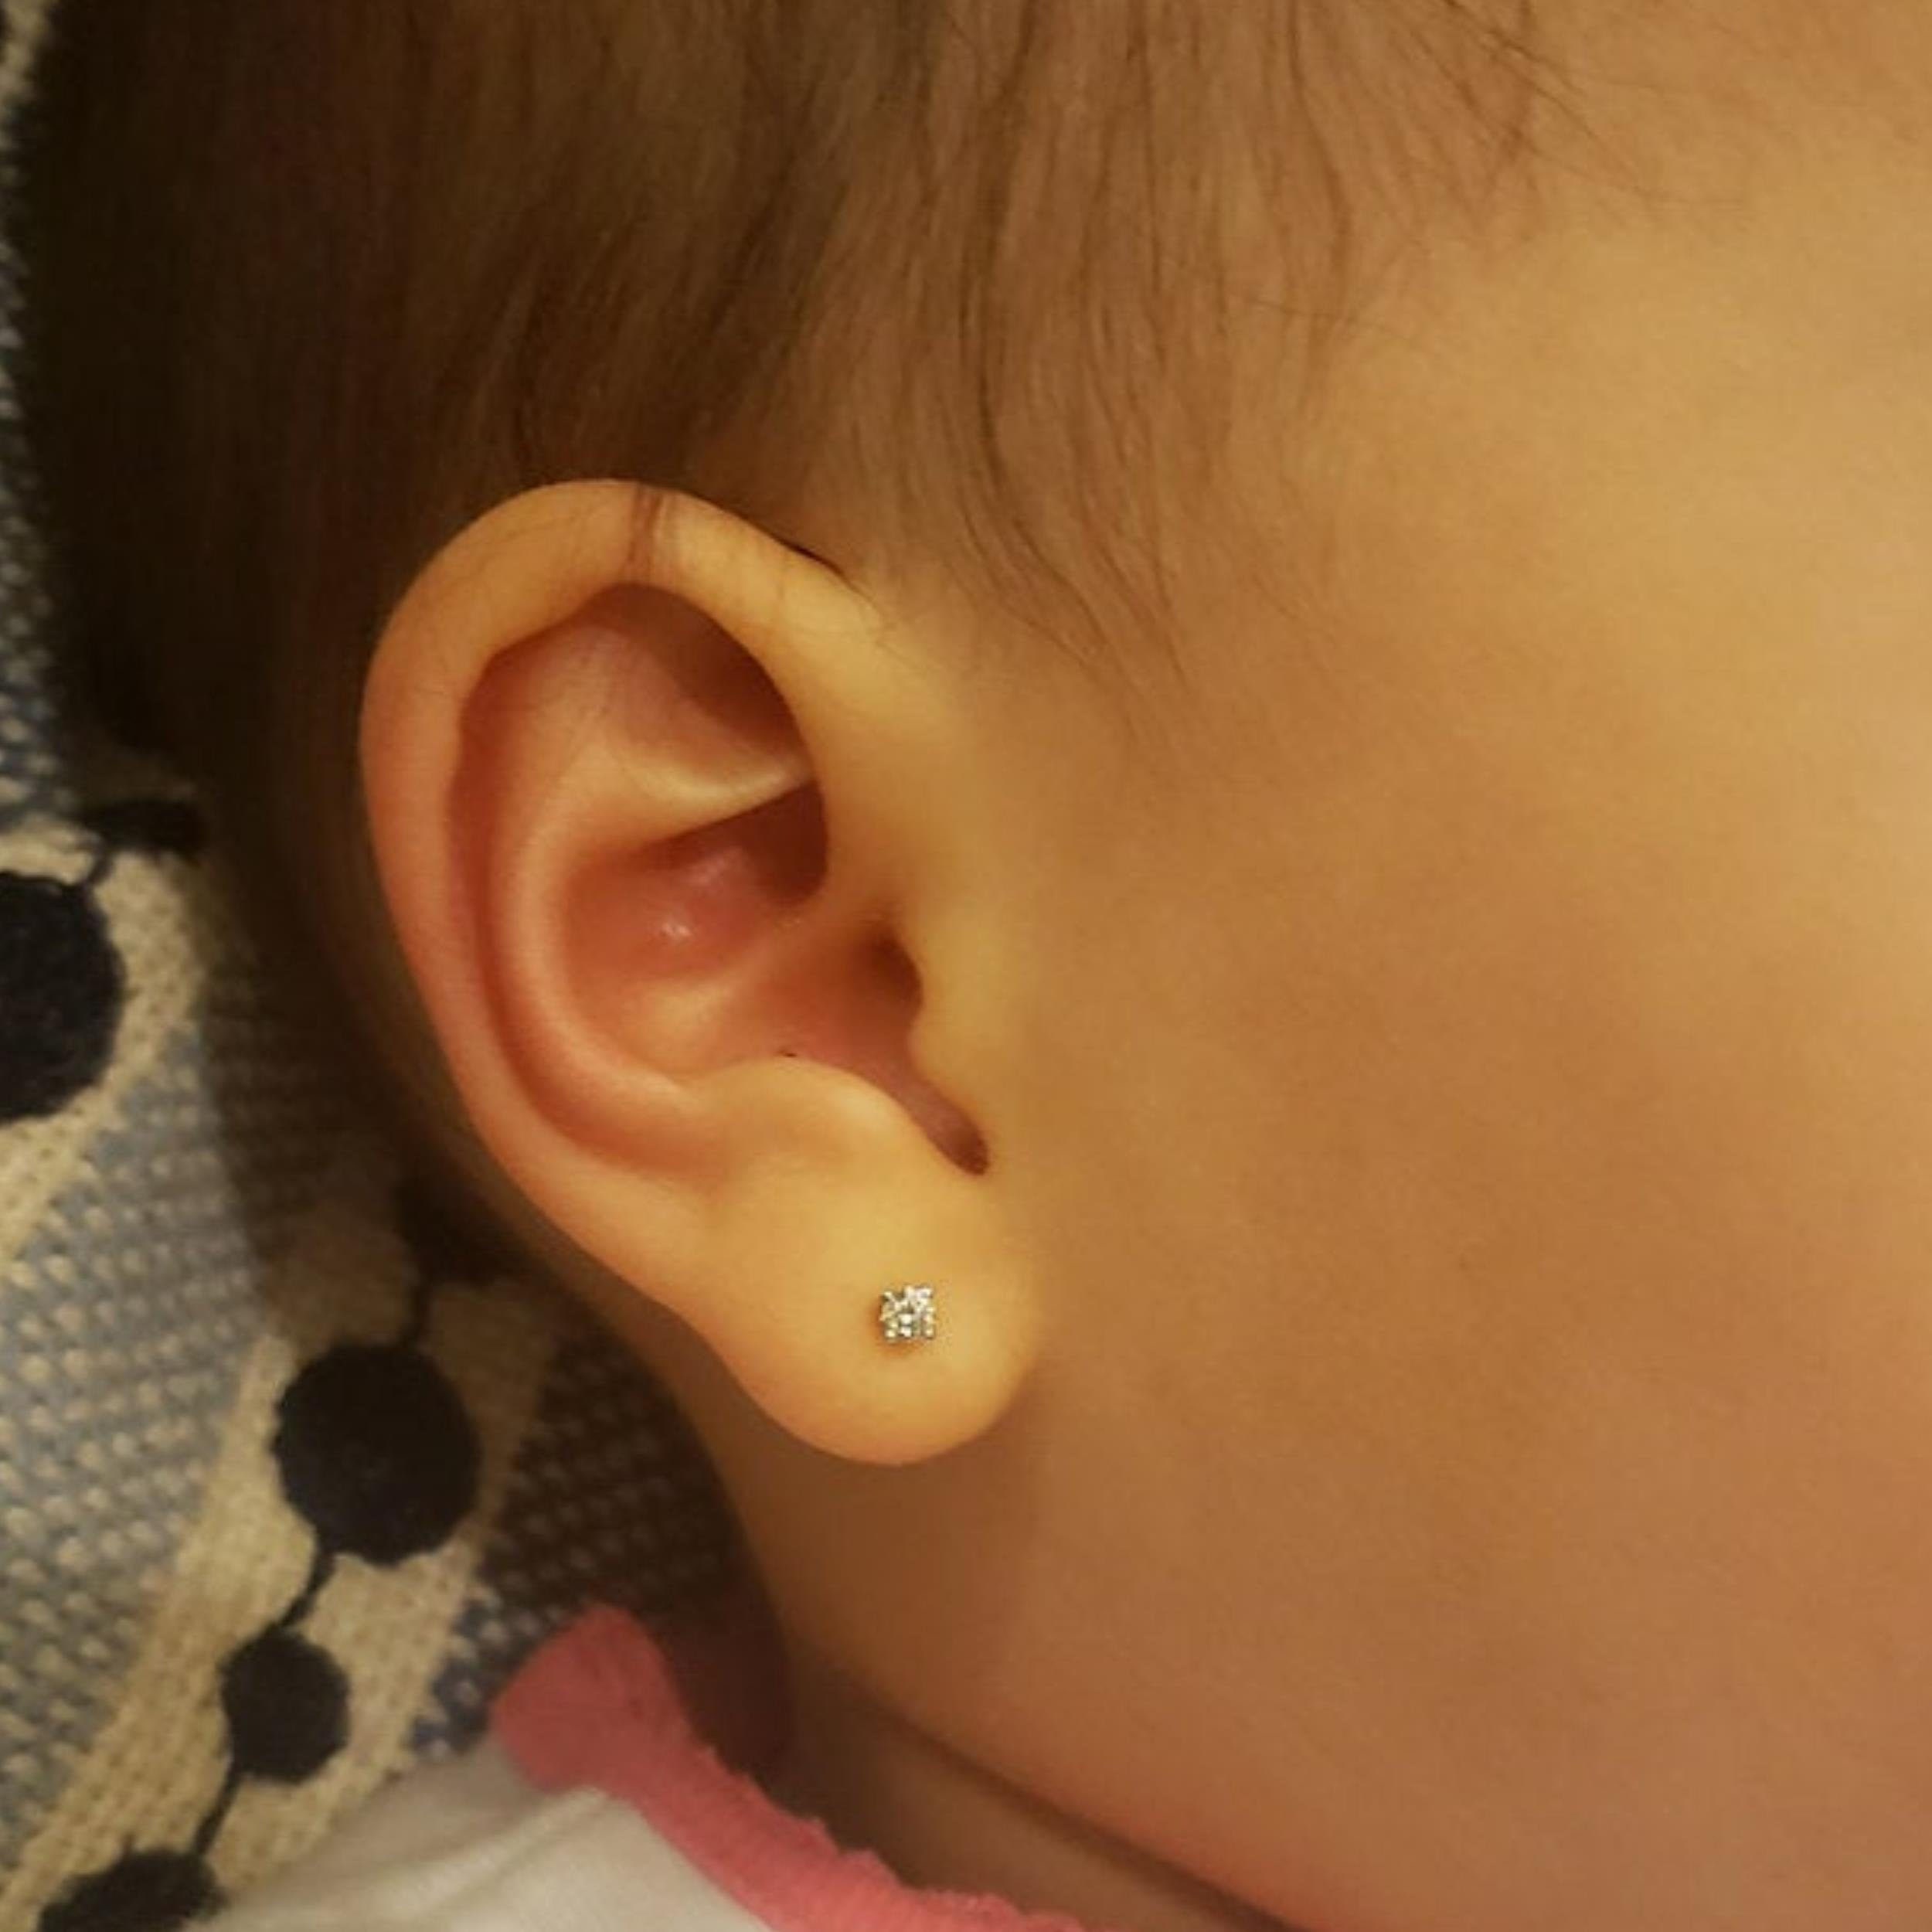 How to Choose the Best Earrings for Babies - The Jeweled Lullaby